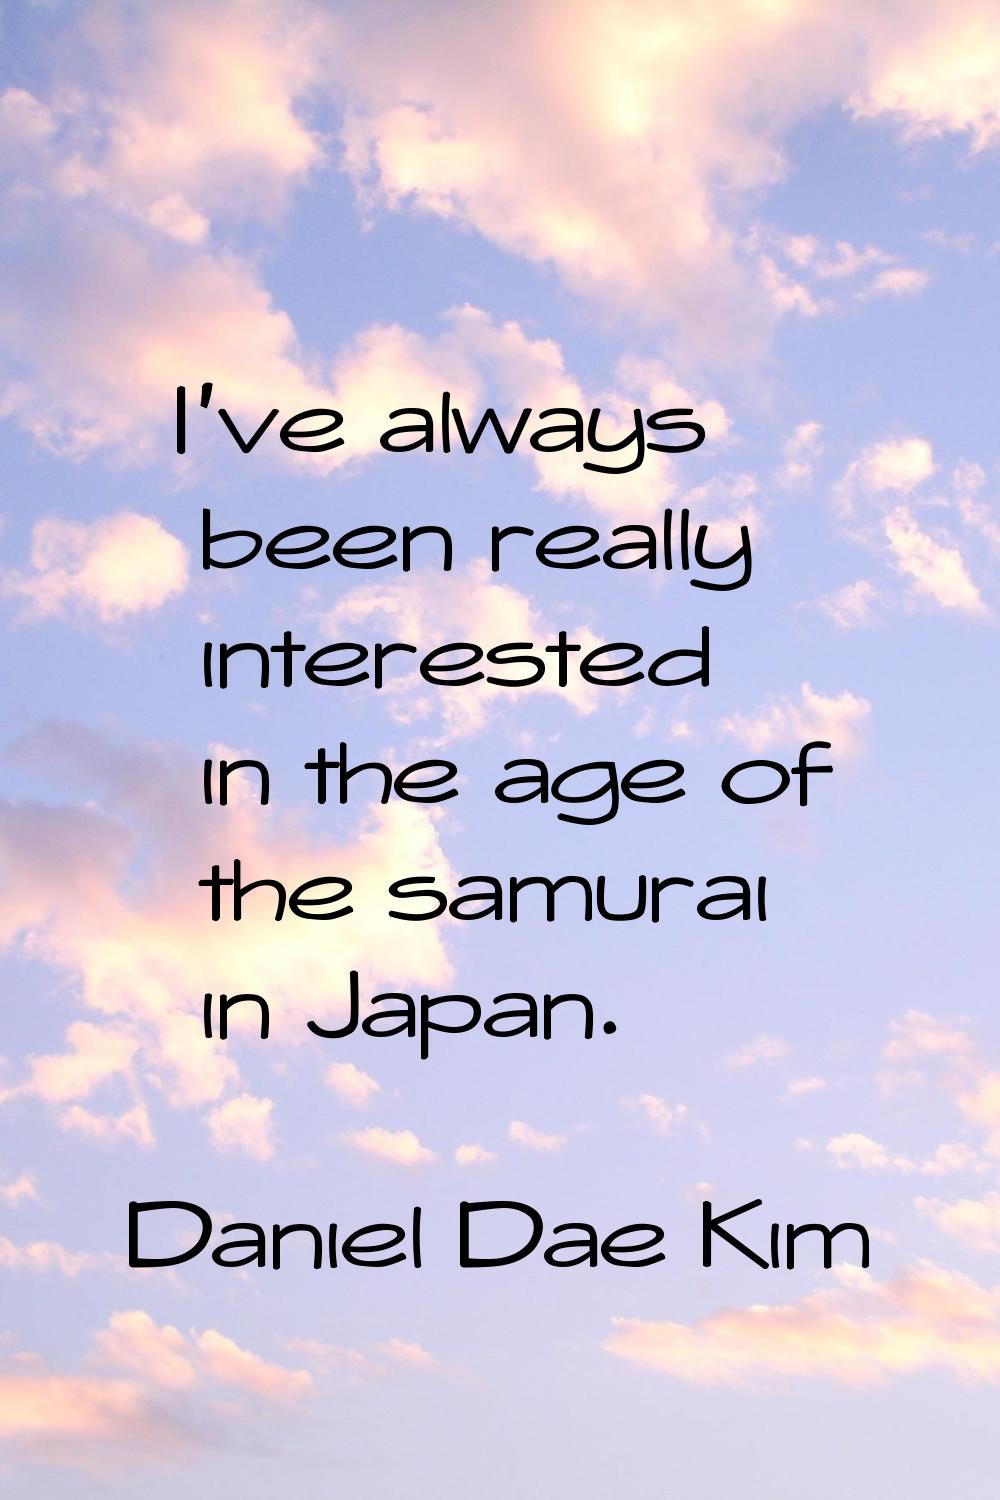 I've always been really interested in the age of the samurai in Japan.